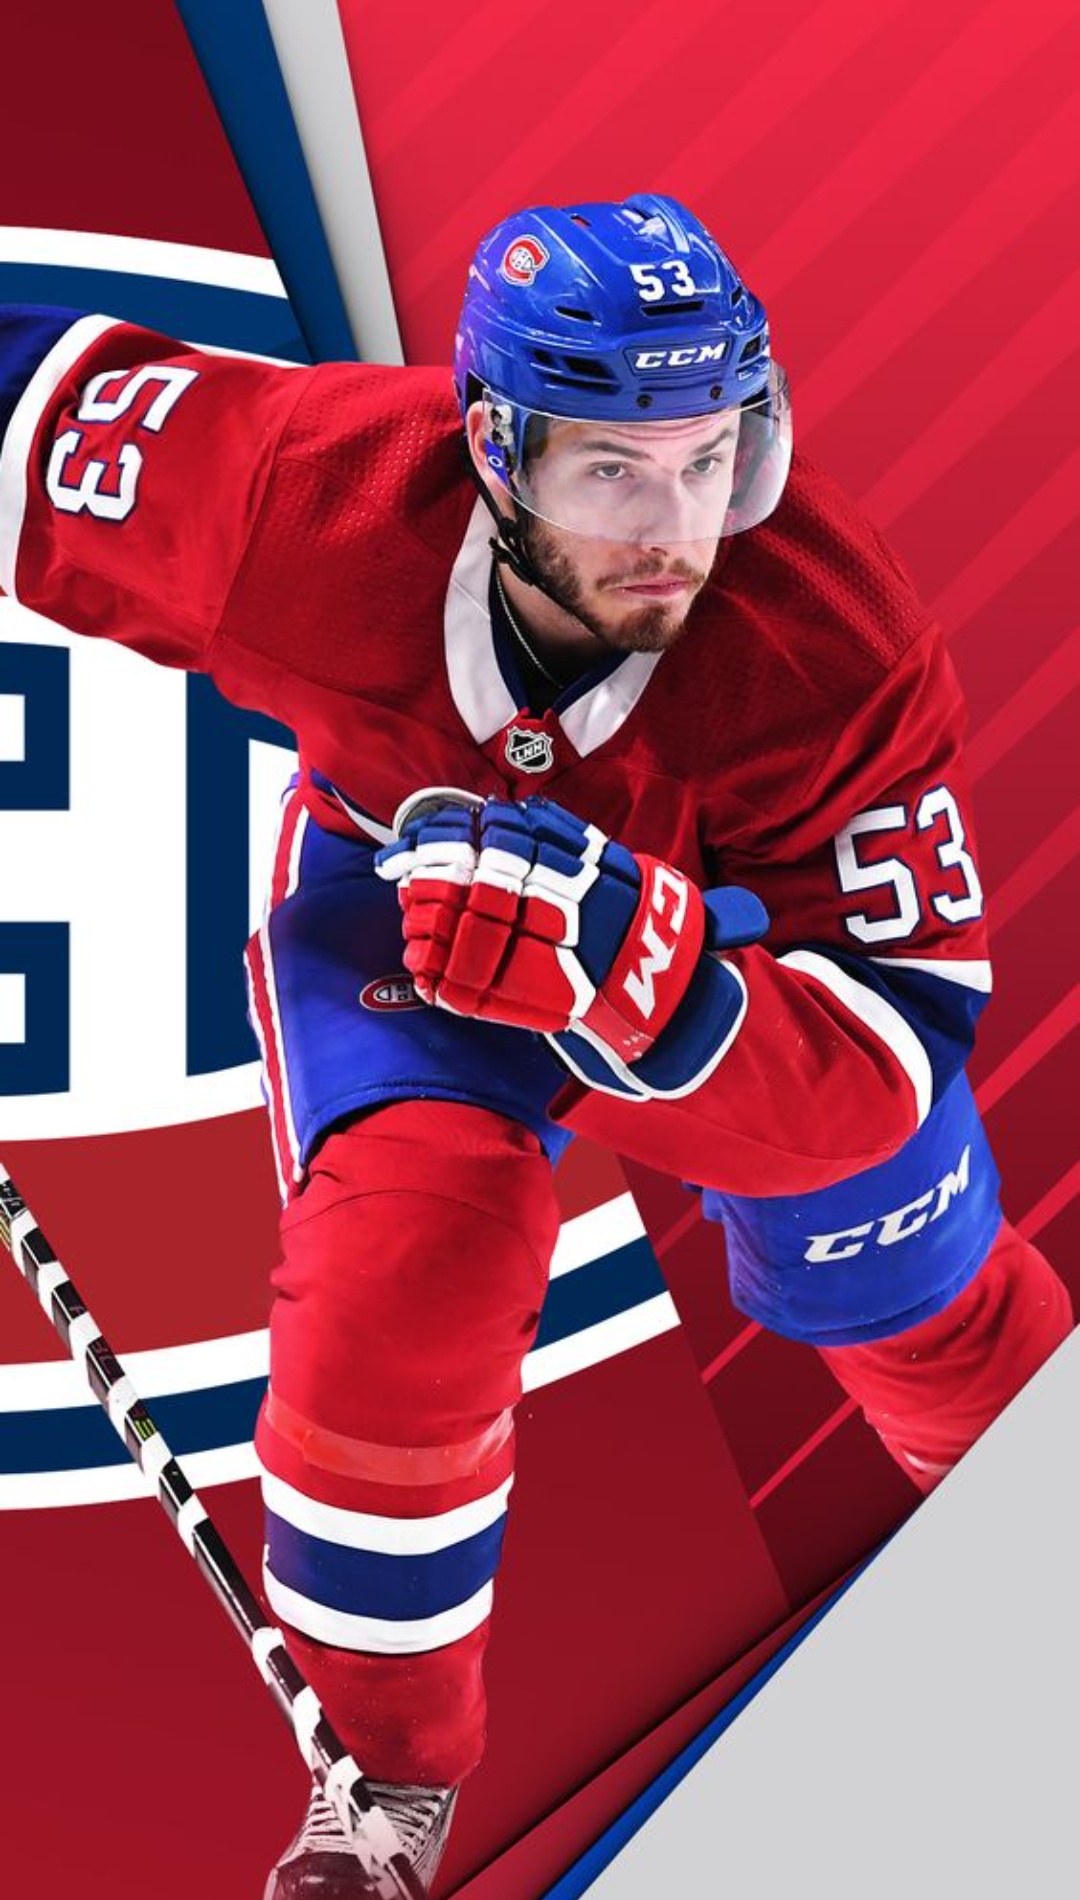 Wallpapers Montreal Canadiens